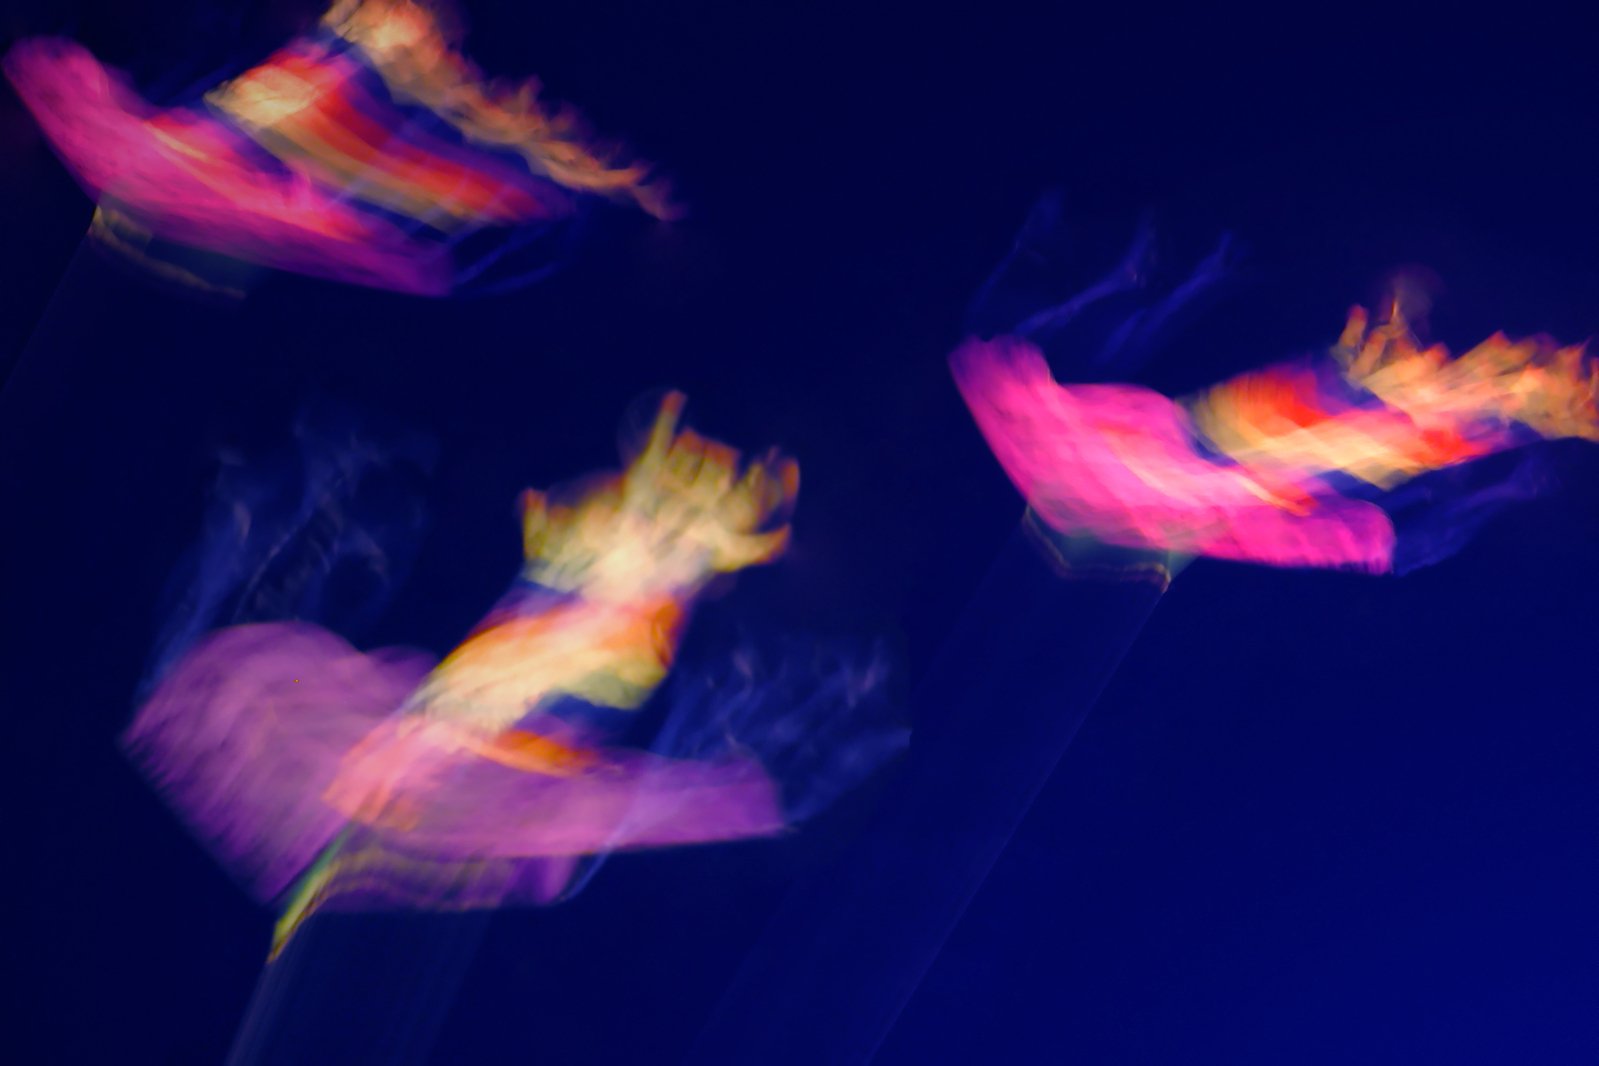 blurry images of kites flying in the air